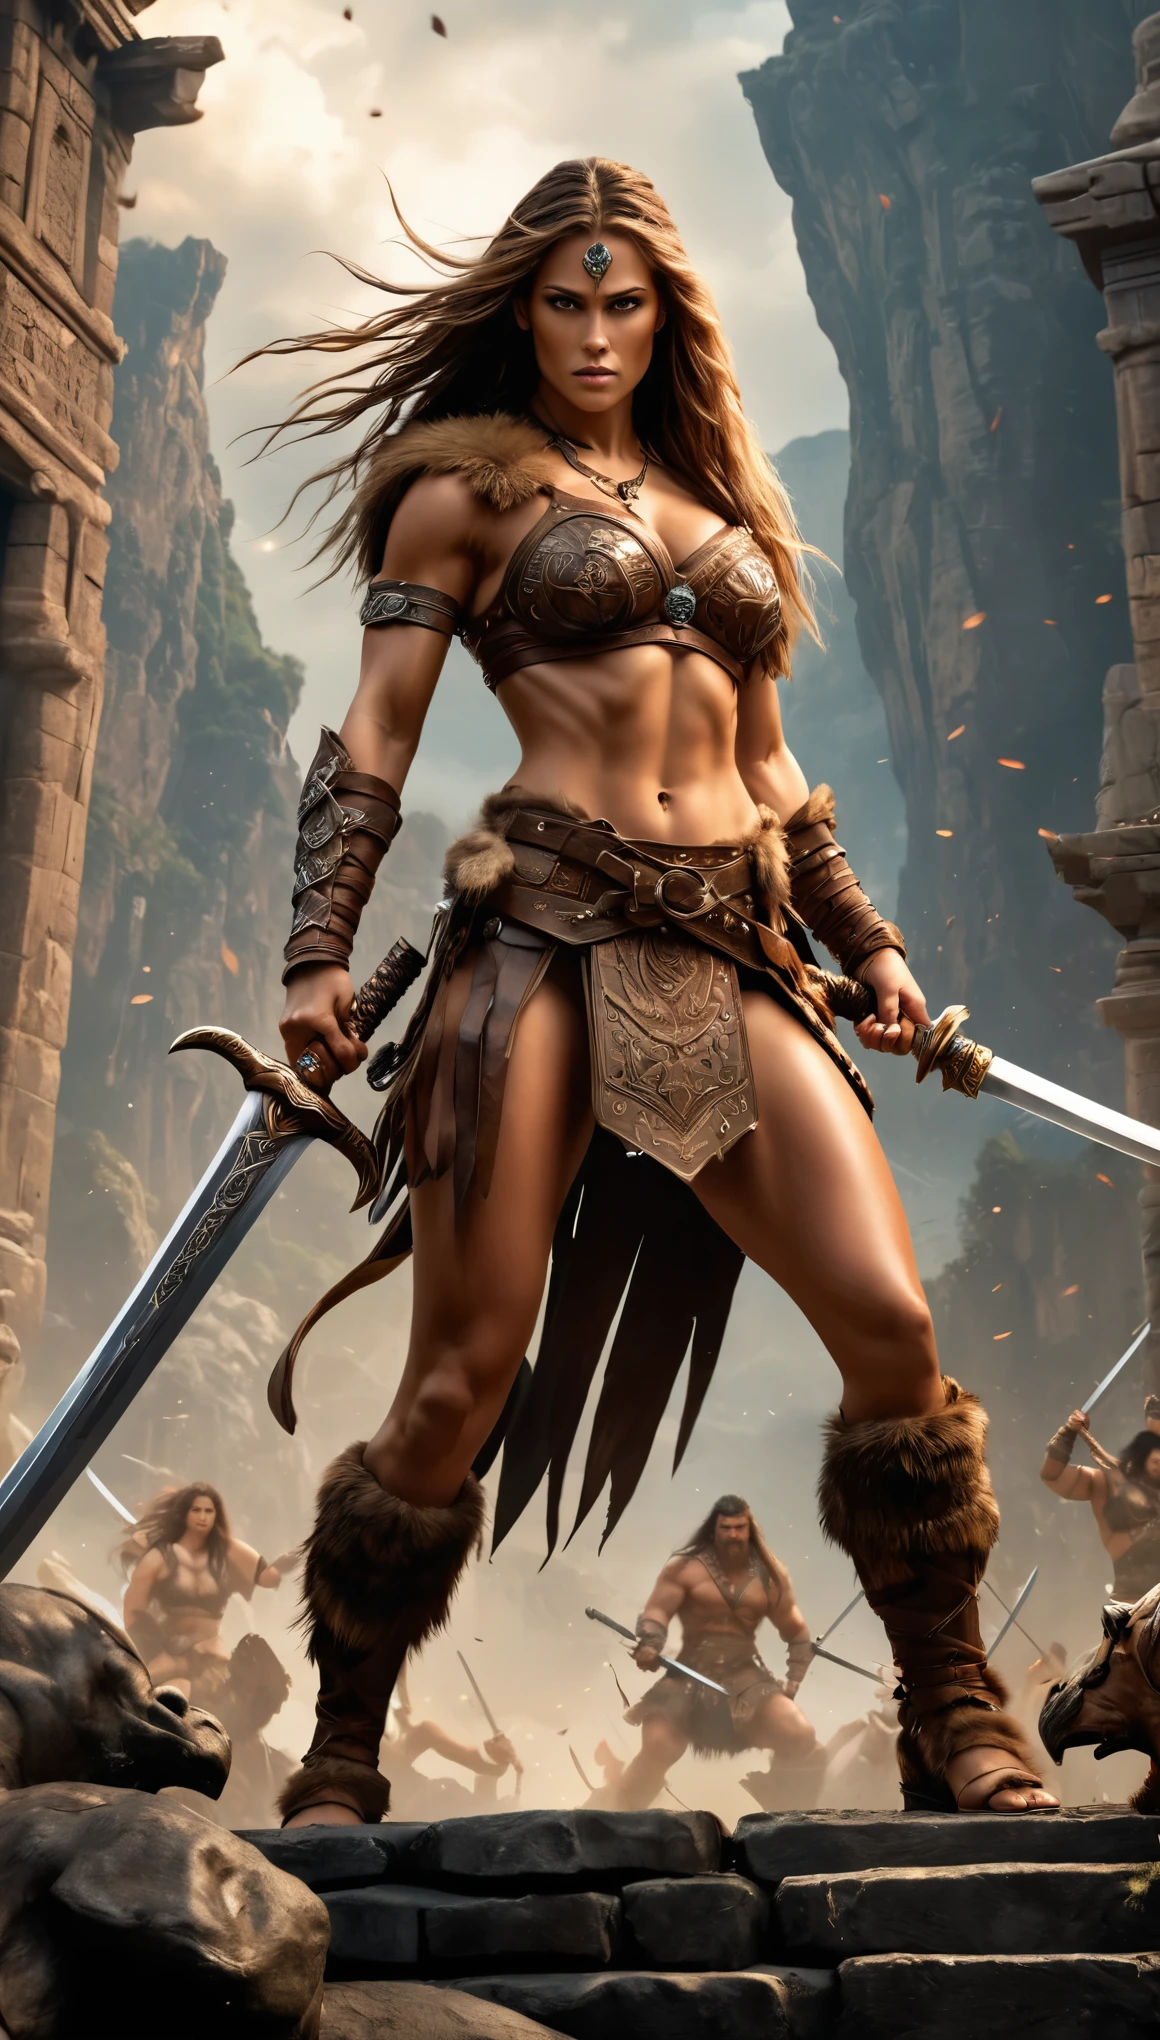 analog style, high resolution, (((masterpiece))), (full body shot:1.3), (low angle shot:1.5), swordsman, female, fantasy, barbarian, action pose, very detailed, long hair, holding long two-handed sword, Award-winning movie poster, (((photorealistic)))